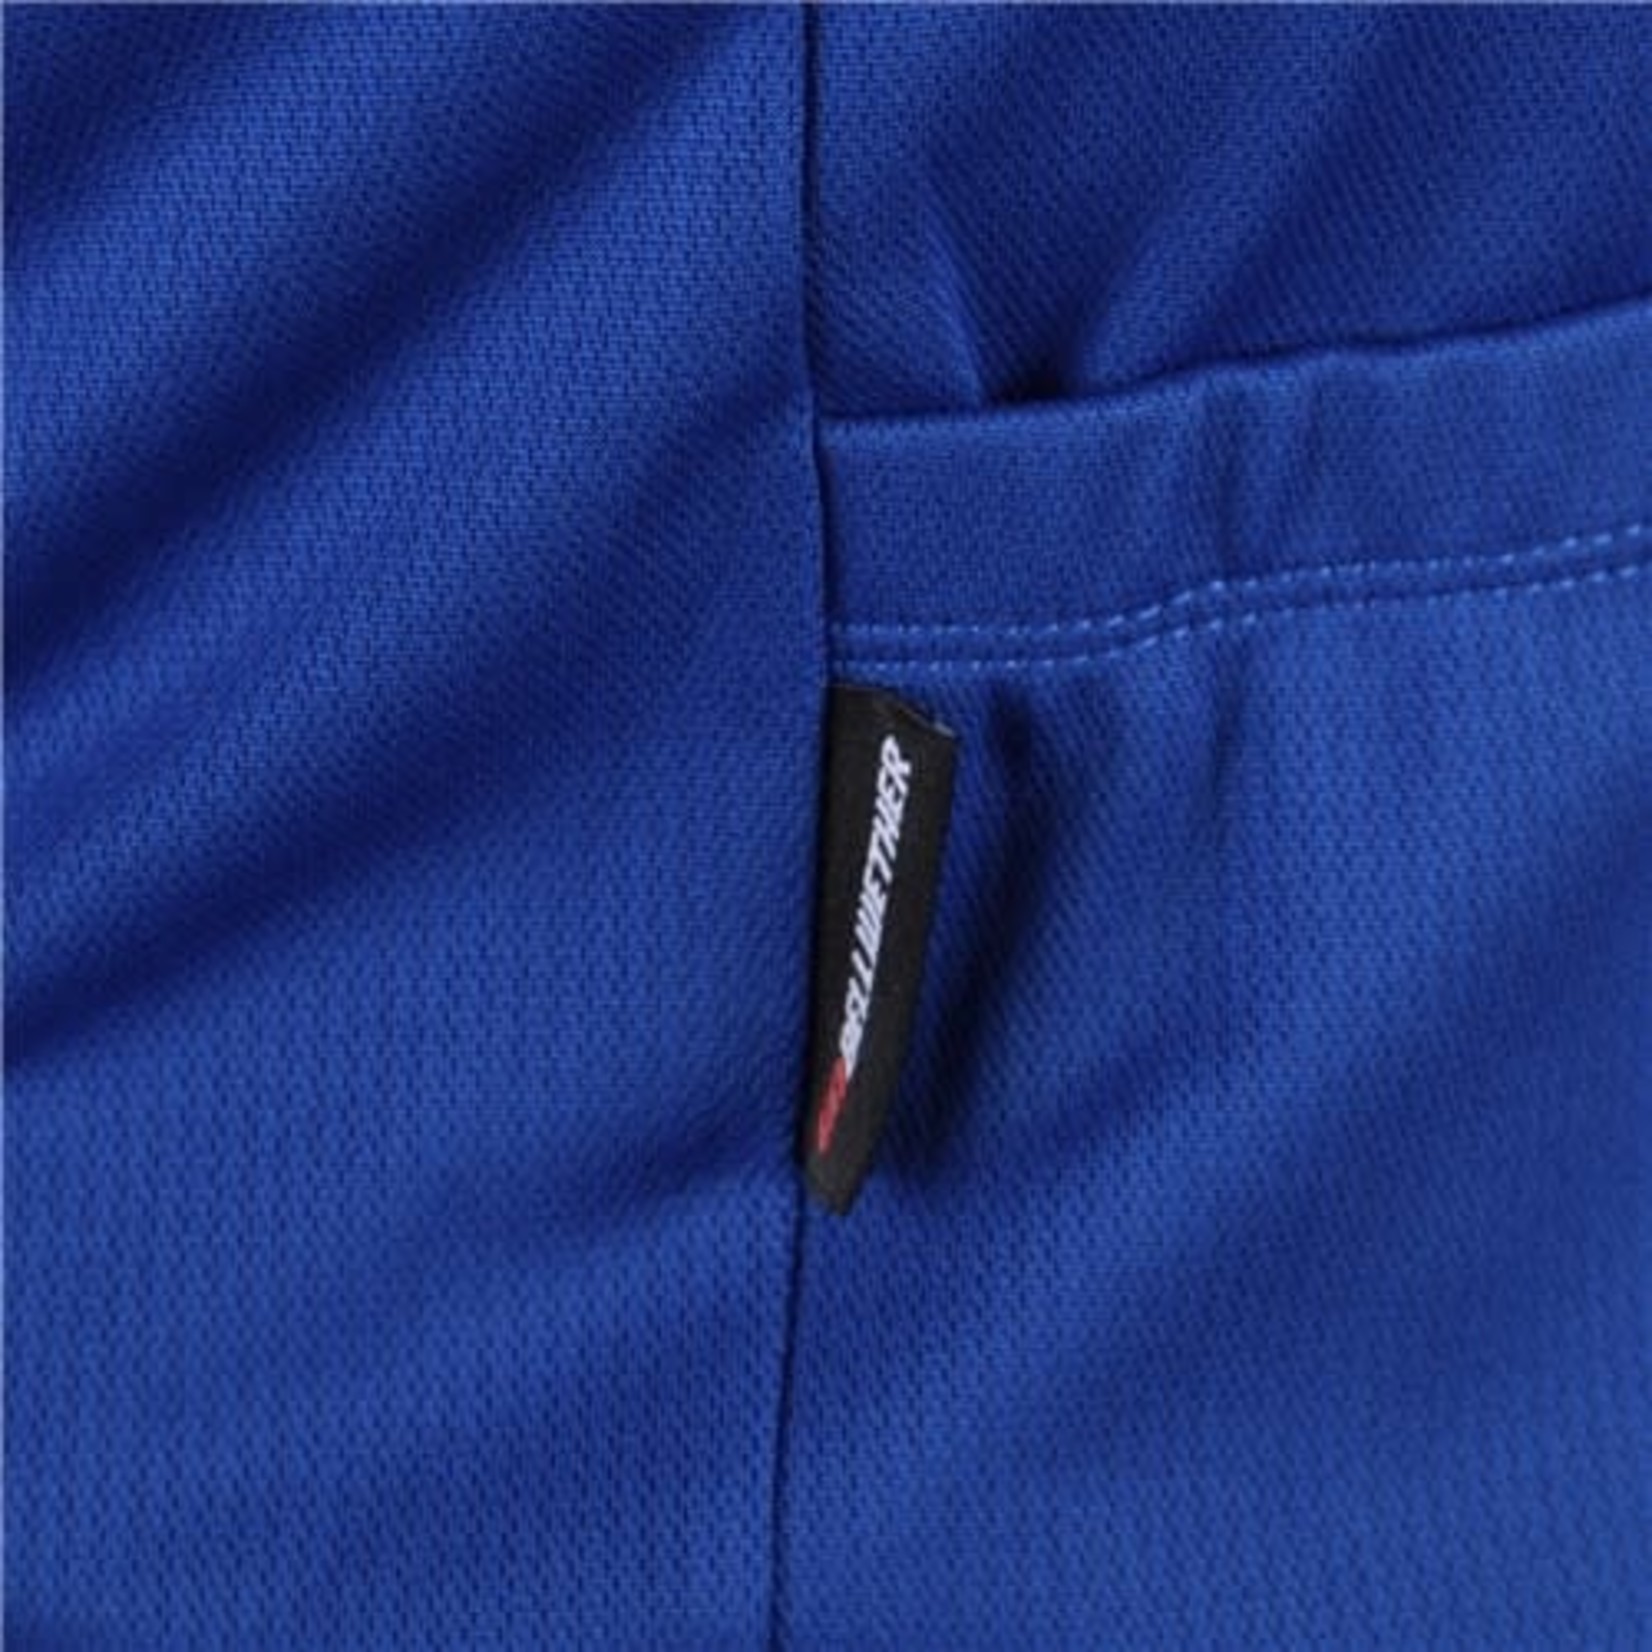 Bellwether Bellwether Thermal Draft Men's Semi-Fitted Long Sleeve Jersey - Royal